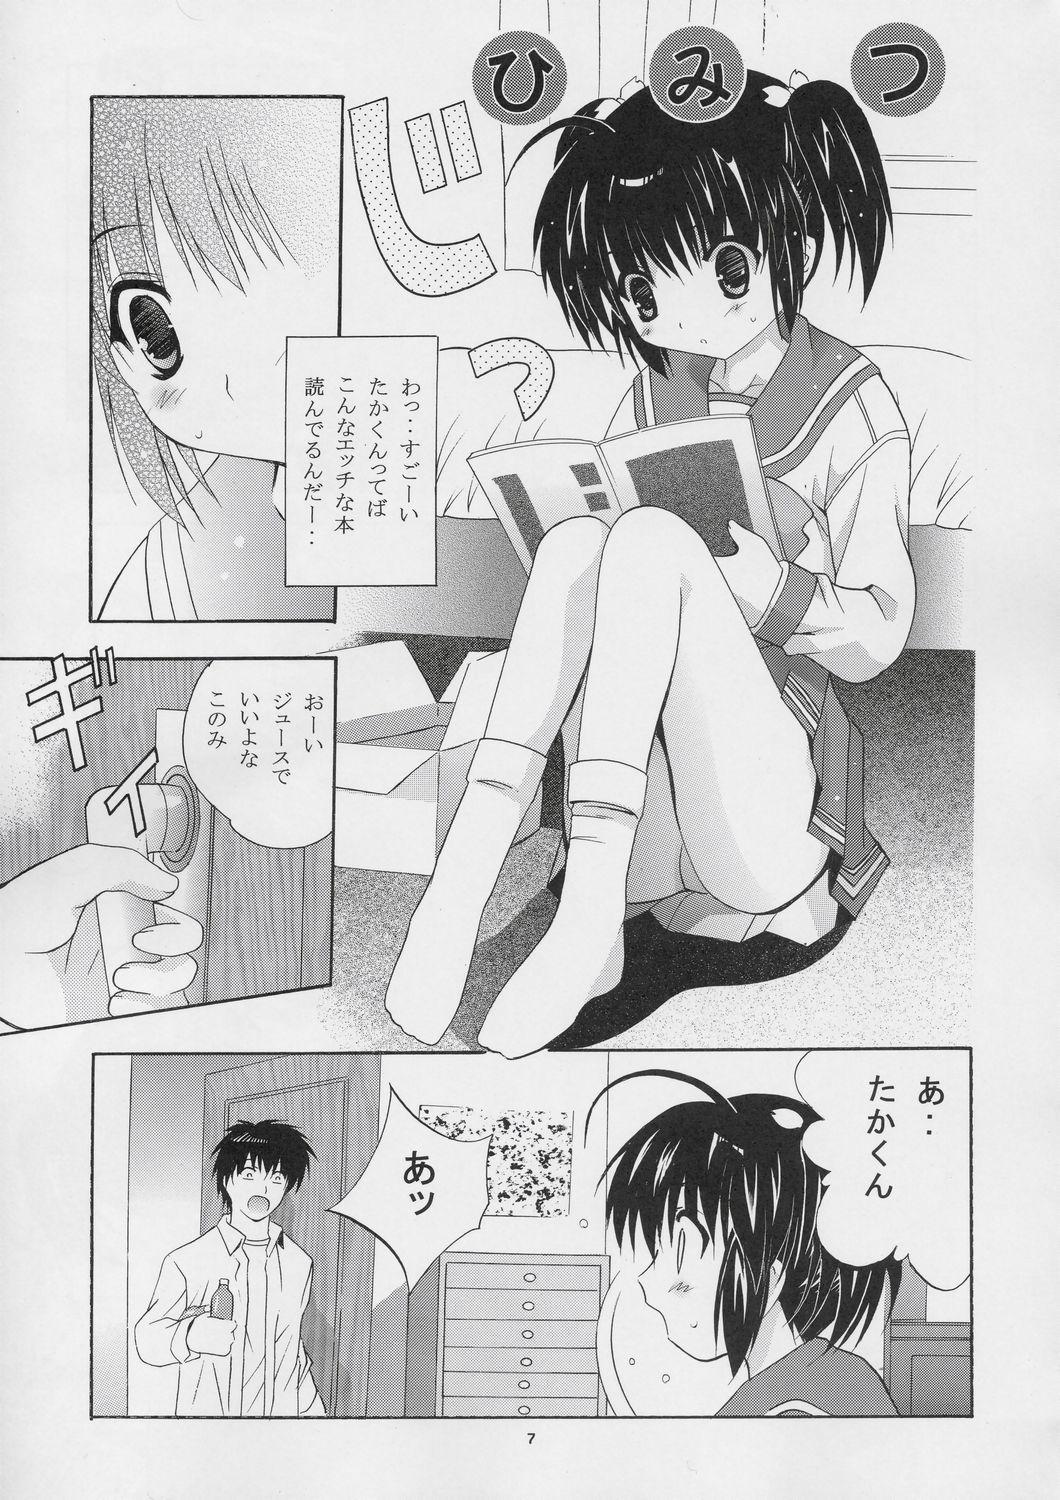 Throat MOUSOU THEATER 16 - Toheart2 Freeporn - Page 6